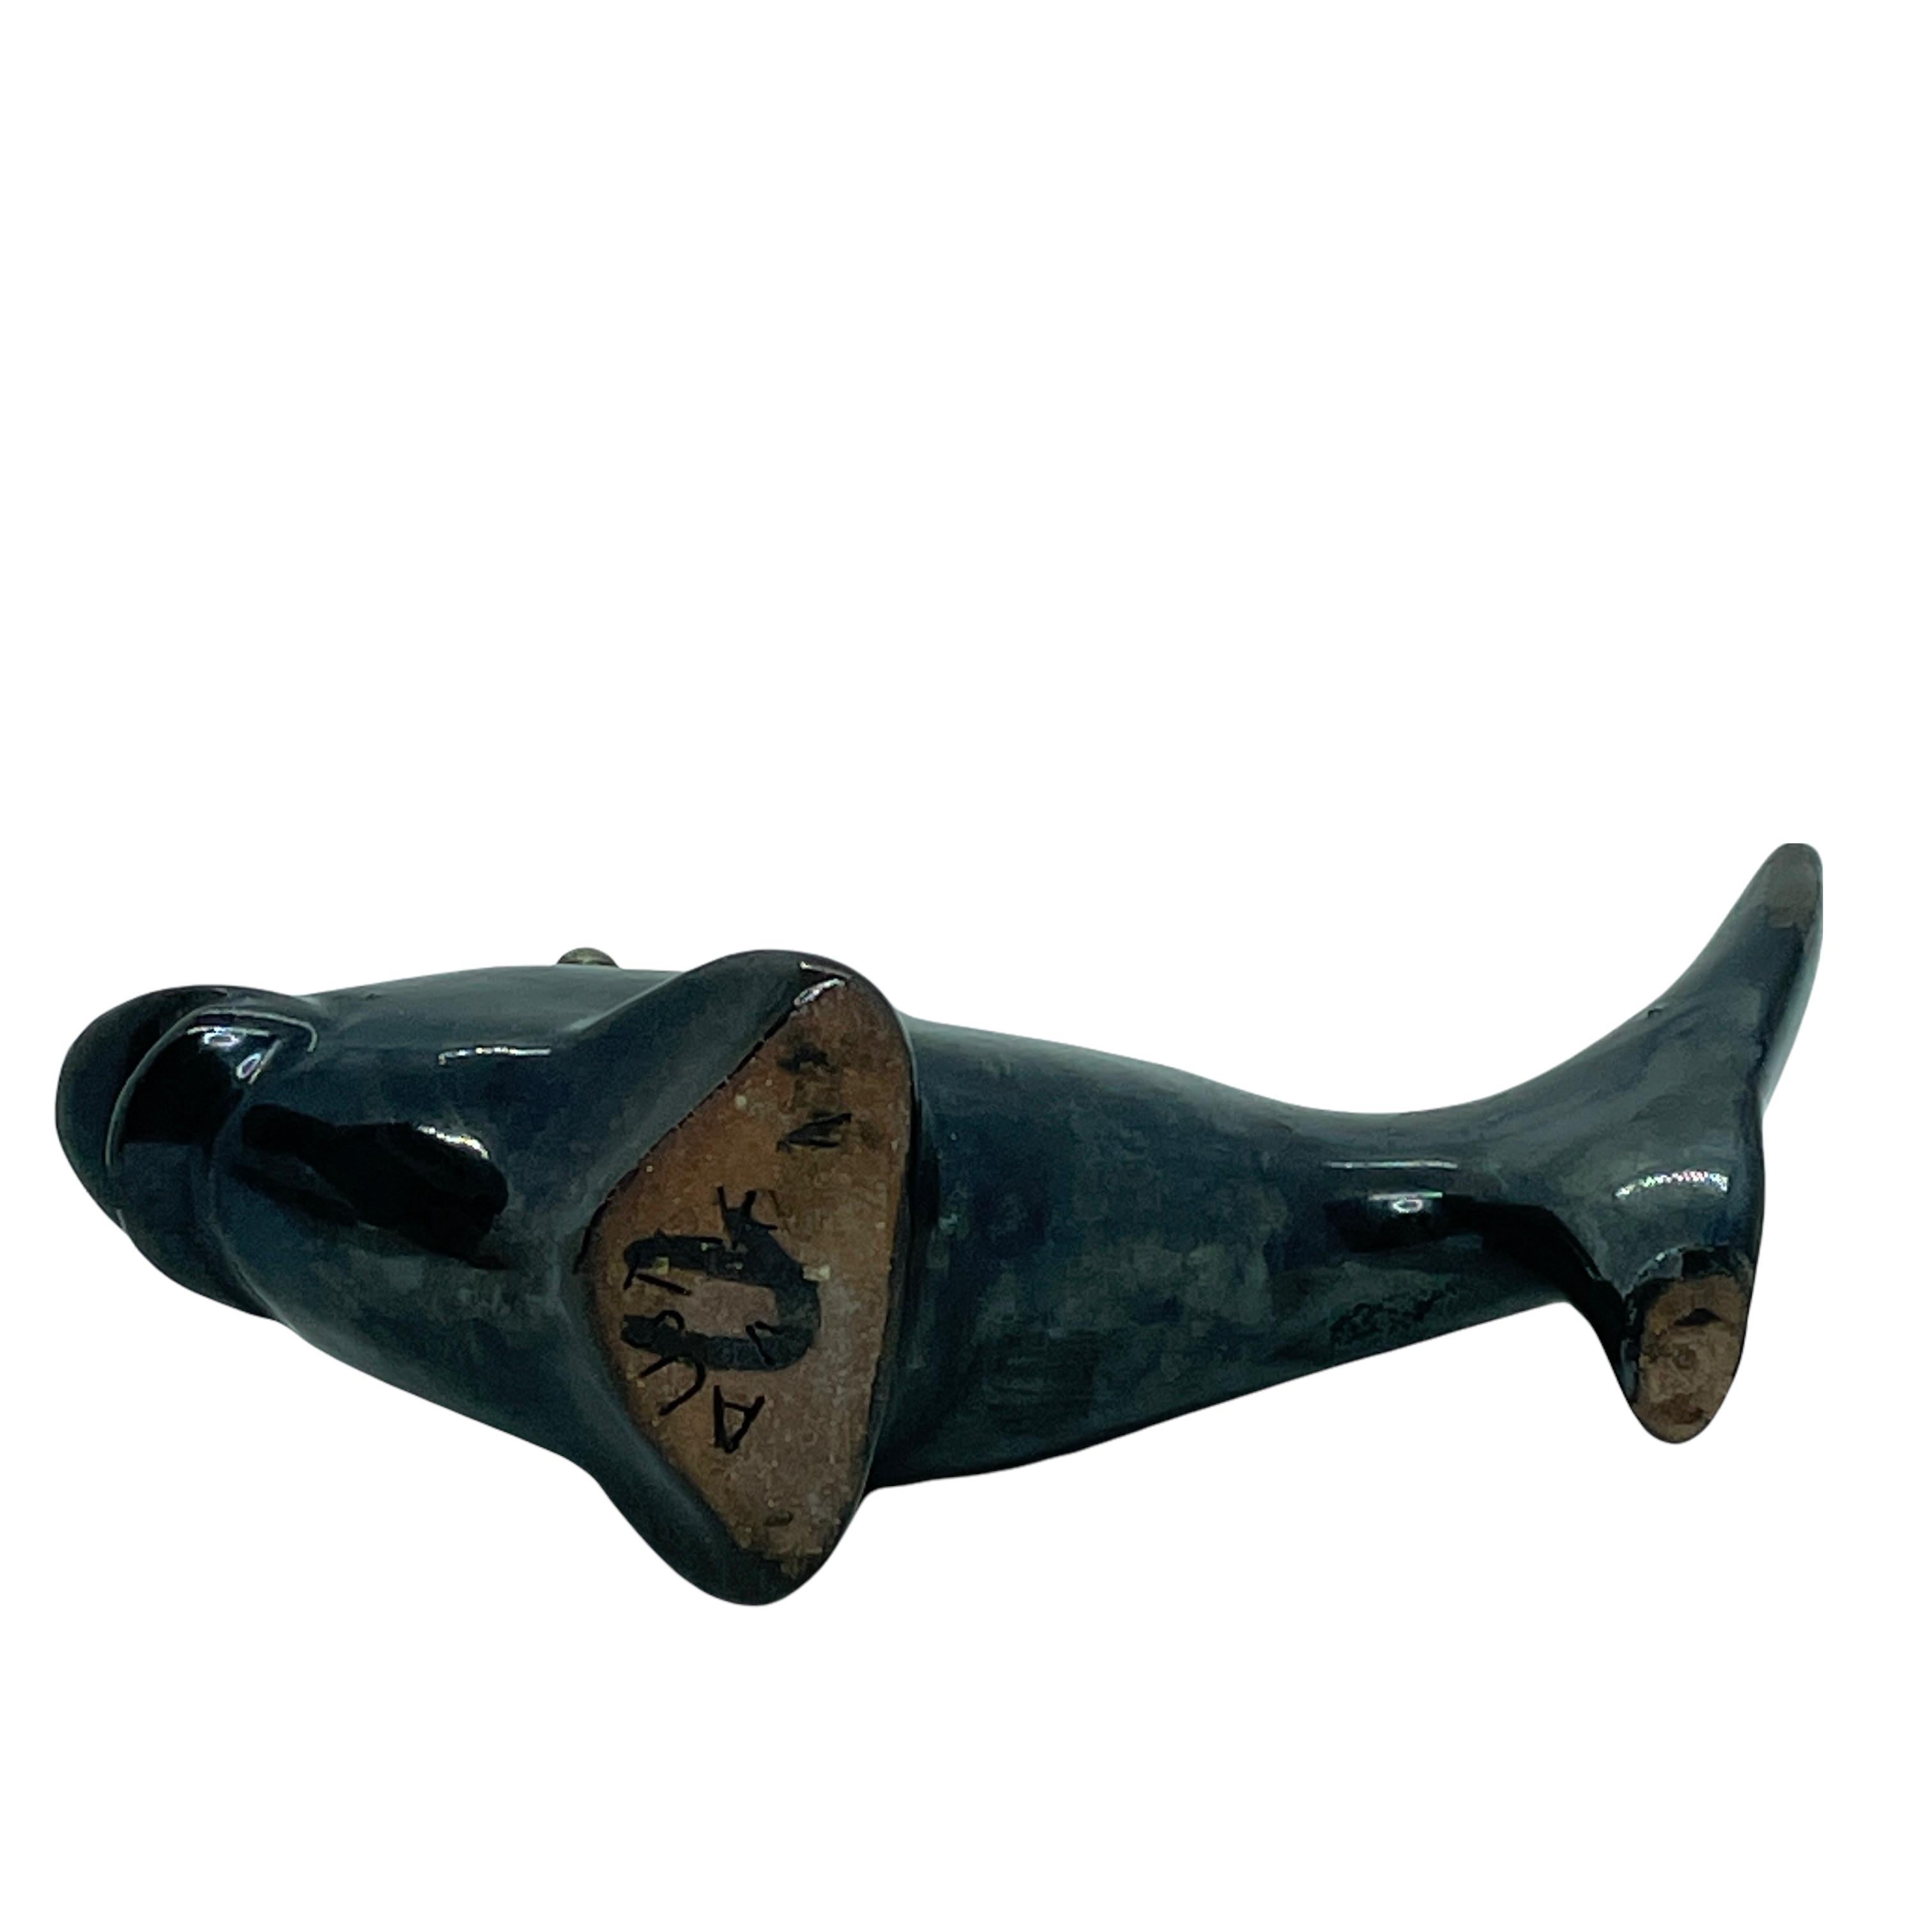 Mid-20th Century Fish Midcentury Ceramic Toothpick Stand by Leopold Anzengruber, Vienna Austria For Sale